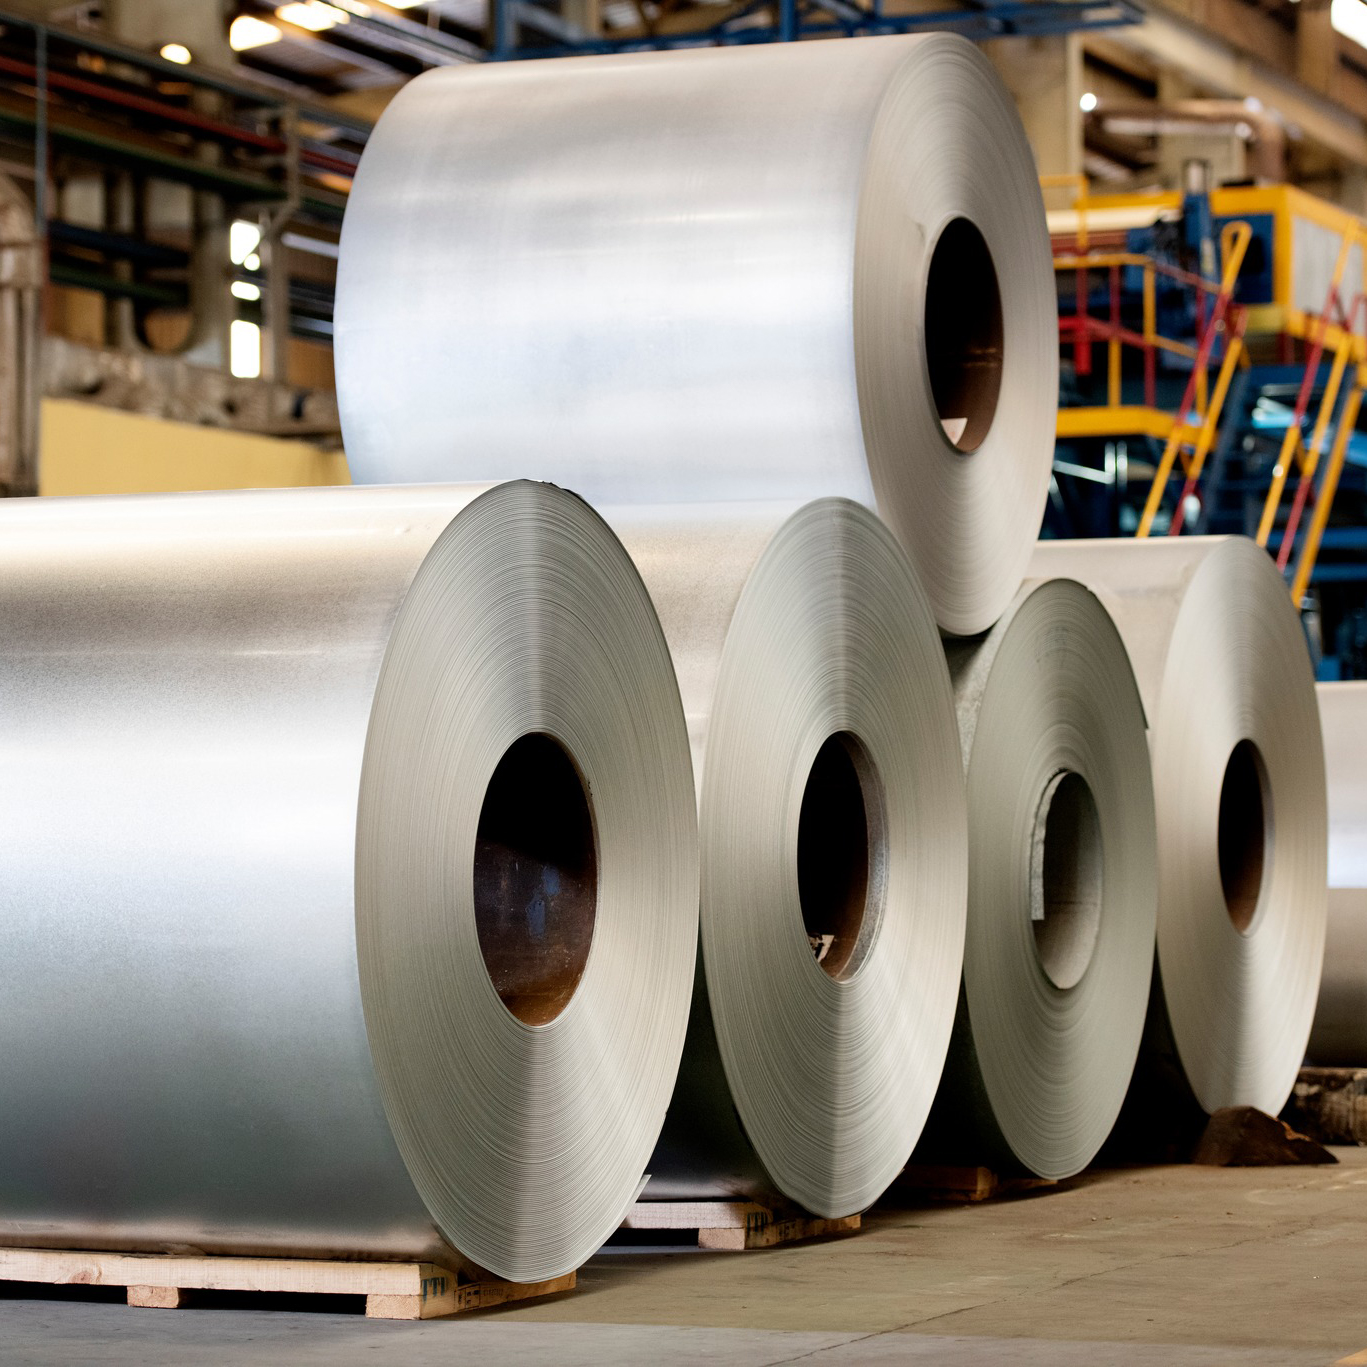 Why do many people choose galvalume steel sheet now?